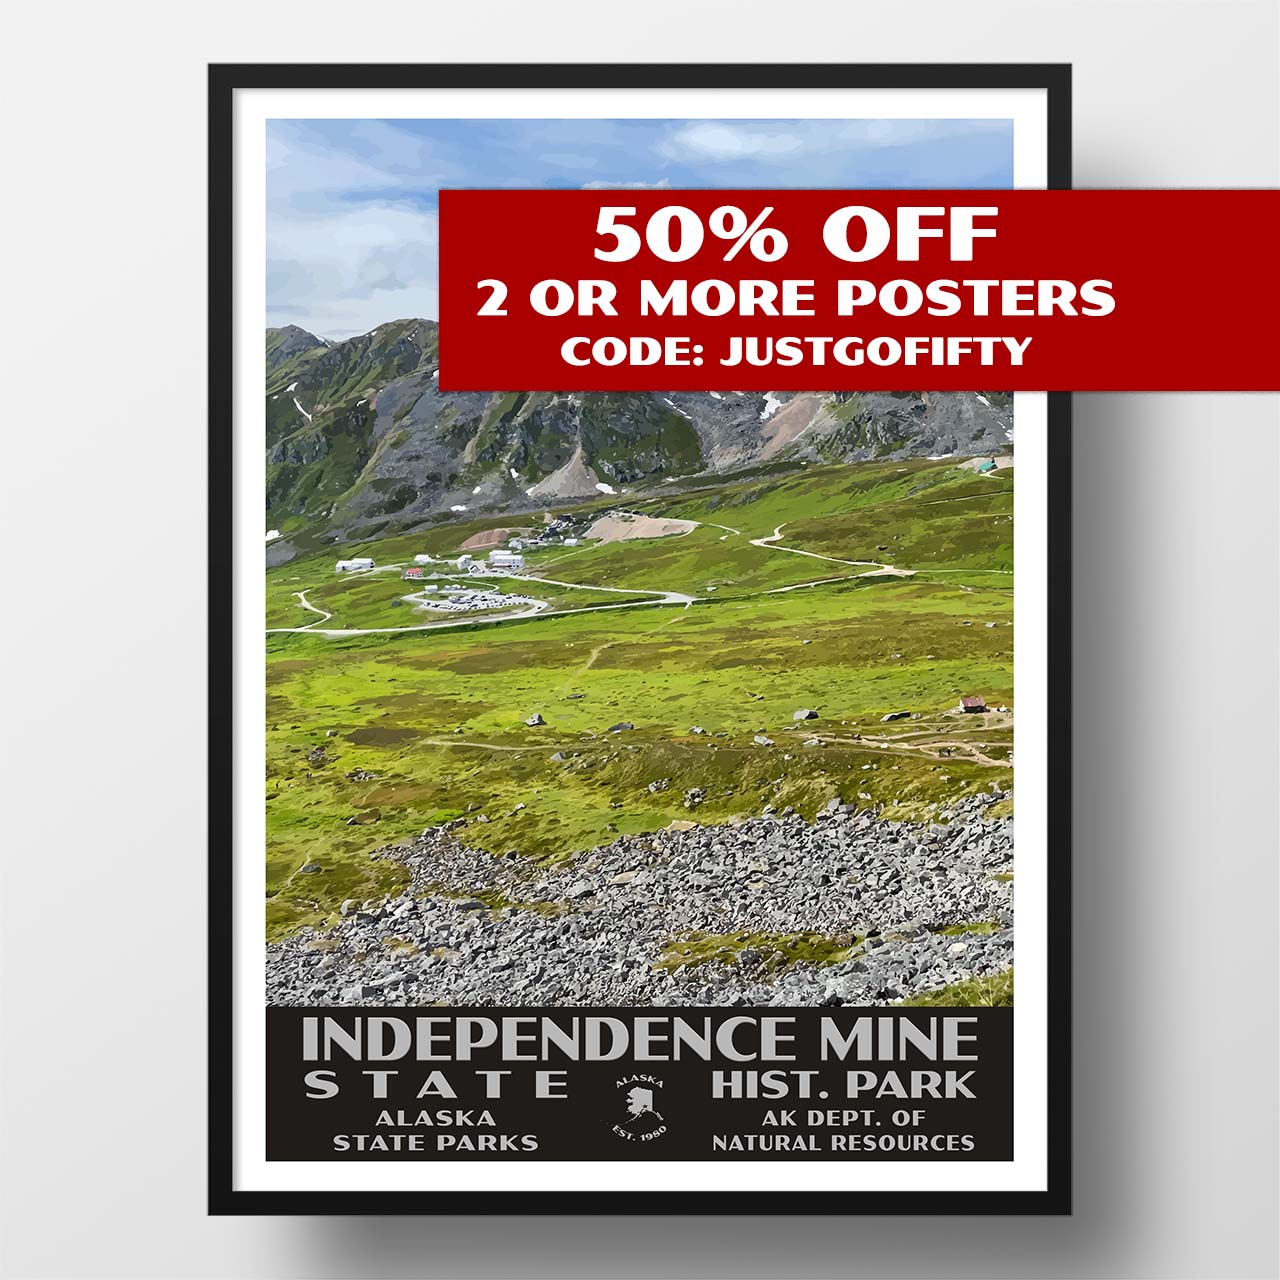 Independence Mine State Historical Park poster